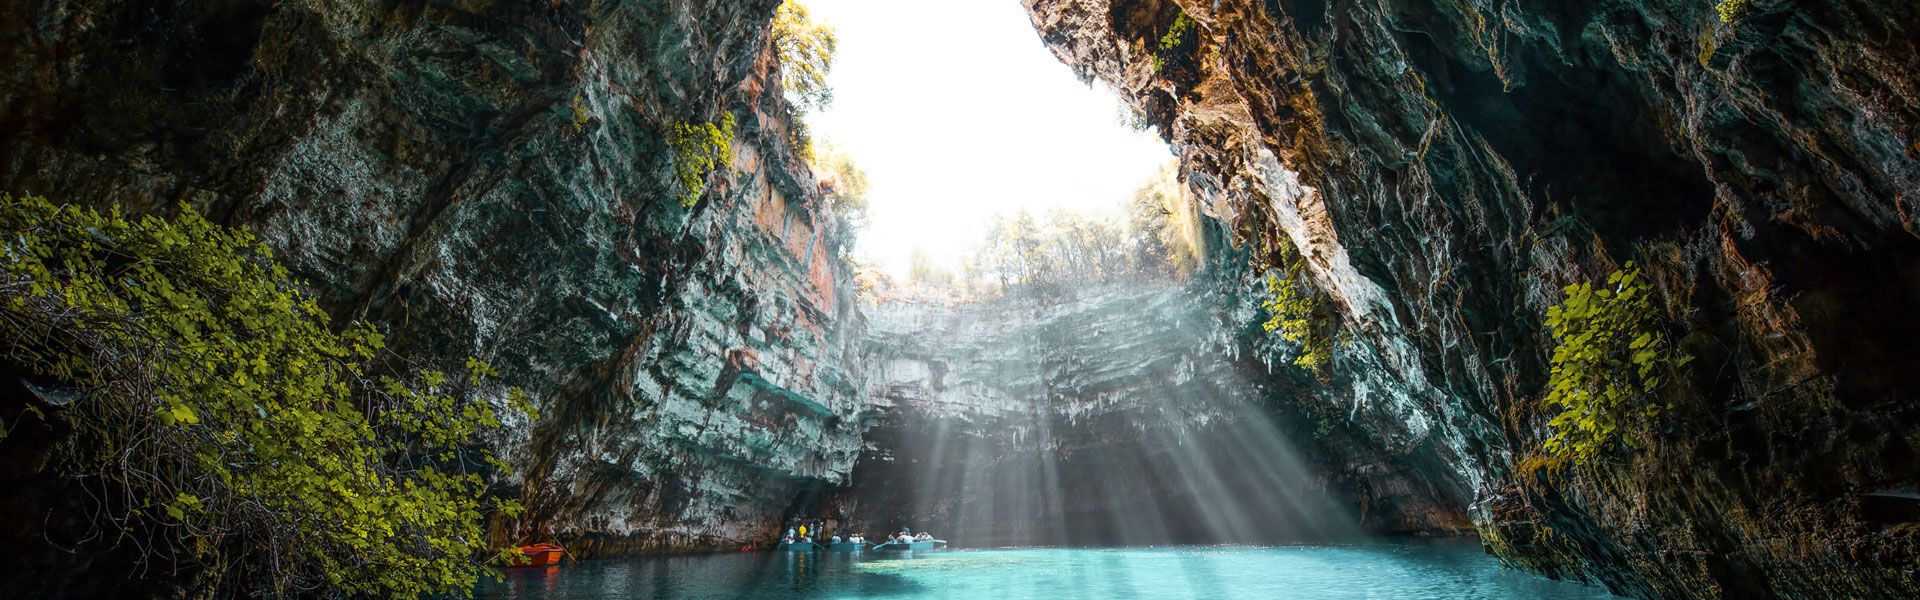 The 50 shades of turquoise in the underground Lake Melissani are mesmerising